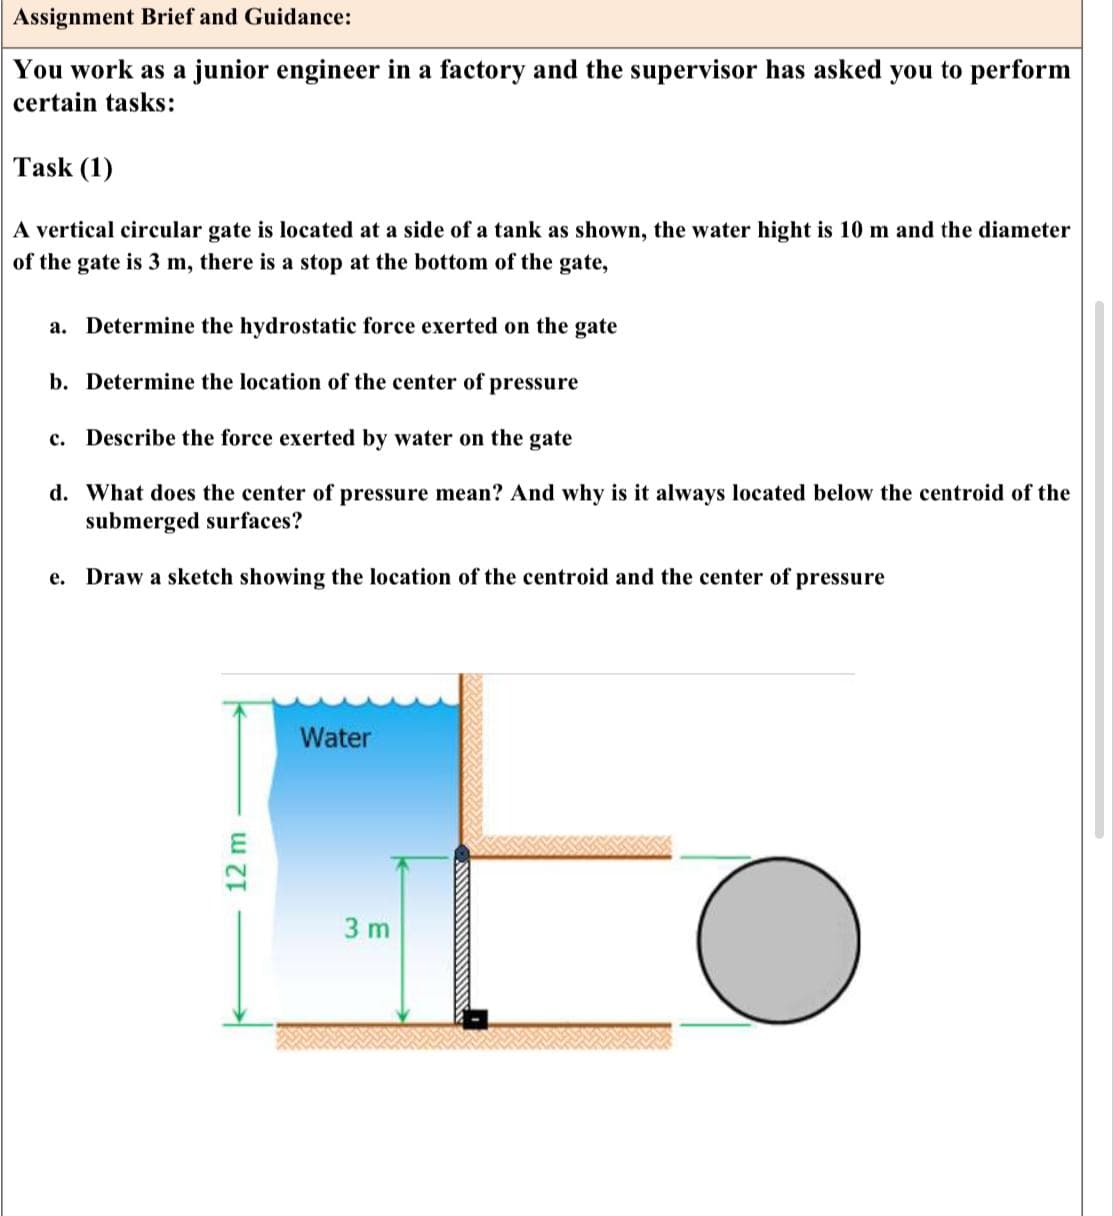 Assignment Brief and Guidance:
You work as a junior engineer in a factory and the supervisor has asked you to perform
certain tasks:
Task (1)
A vertical circular gate is located at a side a tank as shown, the water hight is 10 m and the diameter
of the gate is 3 m, there is a stop at the bottom of the gate,
a. Determine the hydrostatic force exerted on the gate
b. Determine the location of the center of pressure
C. Describe the force exerted by water on the gate
d. What does the center of pressure mean? And why is it always located below the centroid of the
submerged surfaces?
e. Draw a sketch showing the location of the centroid and the center of pressure
12 m
Water
3 m
O